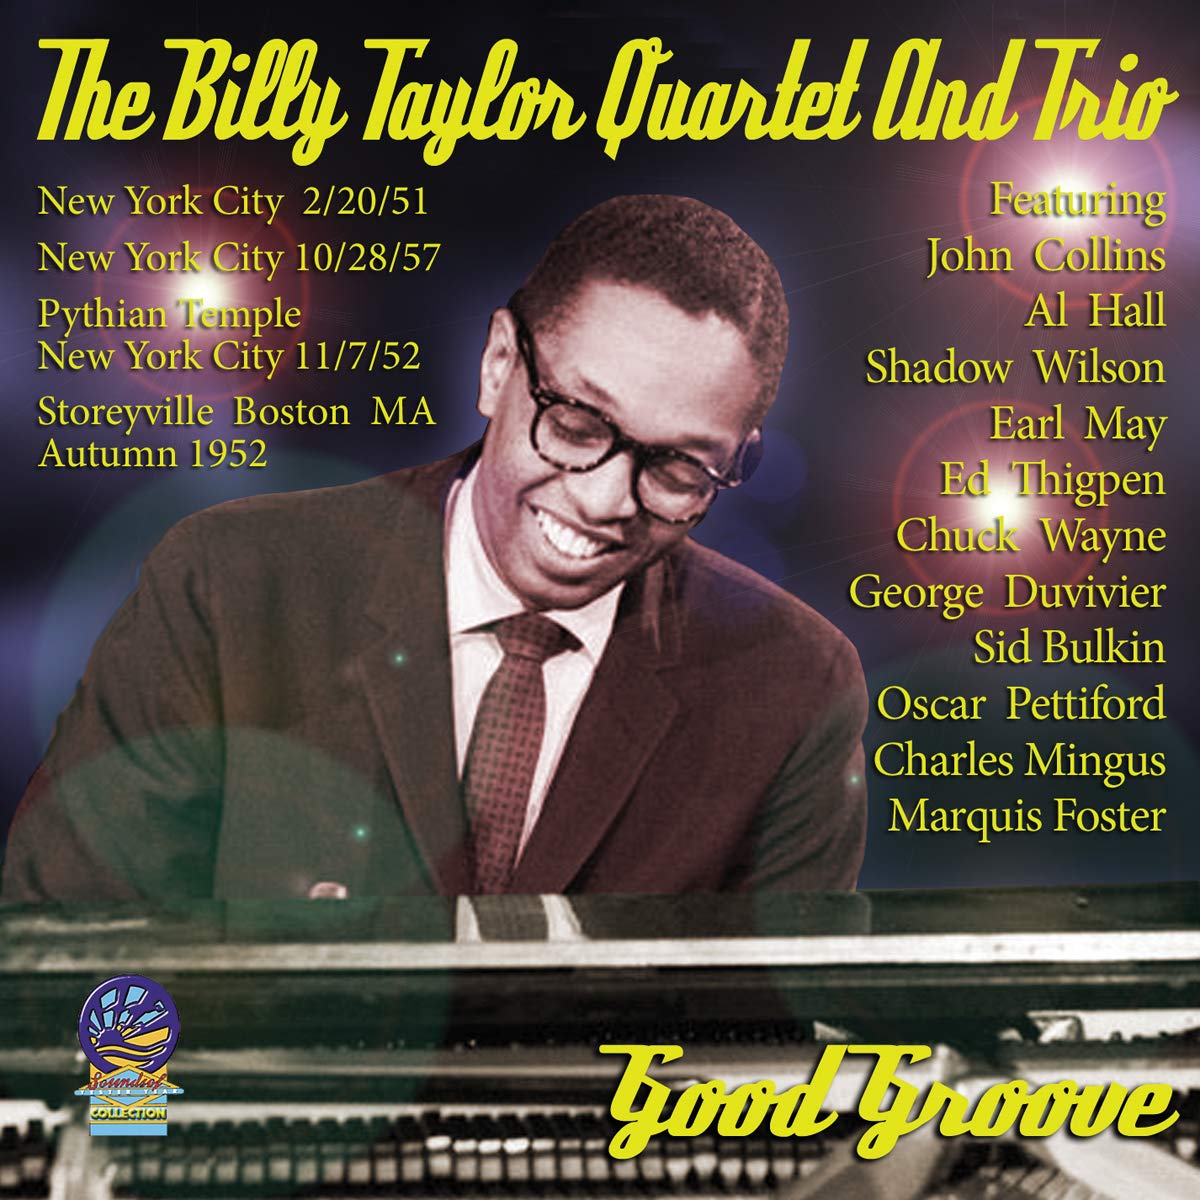 BILLY TAYLOR - Billy Taylor Quartet And Trio : Good Groove cover 